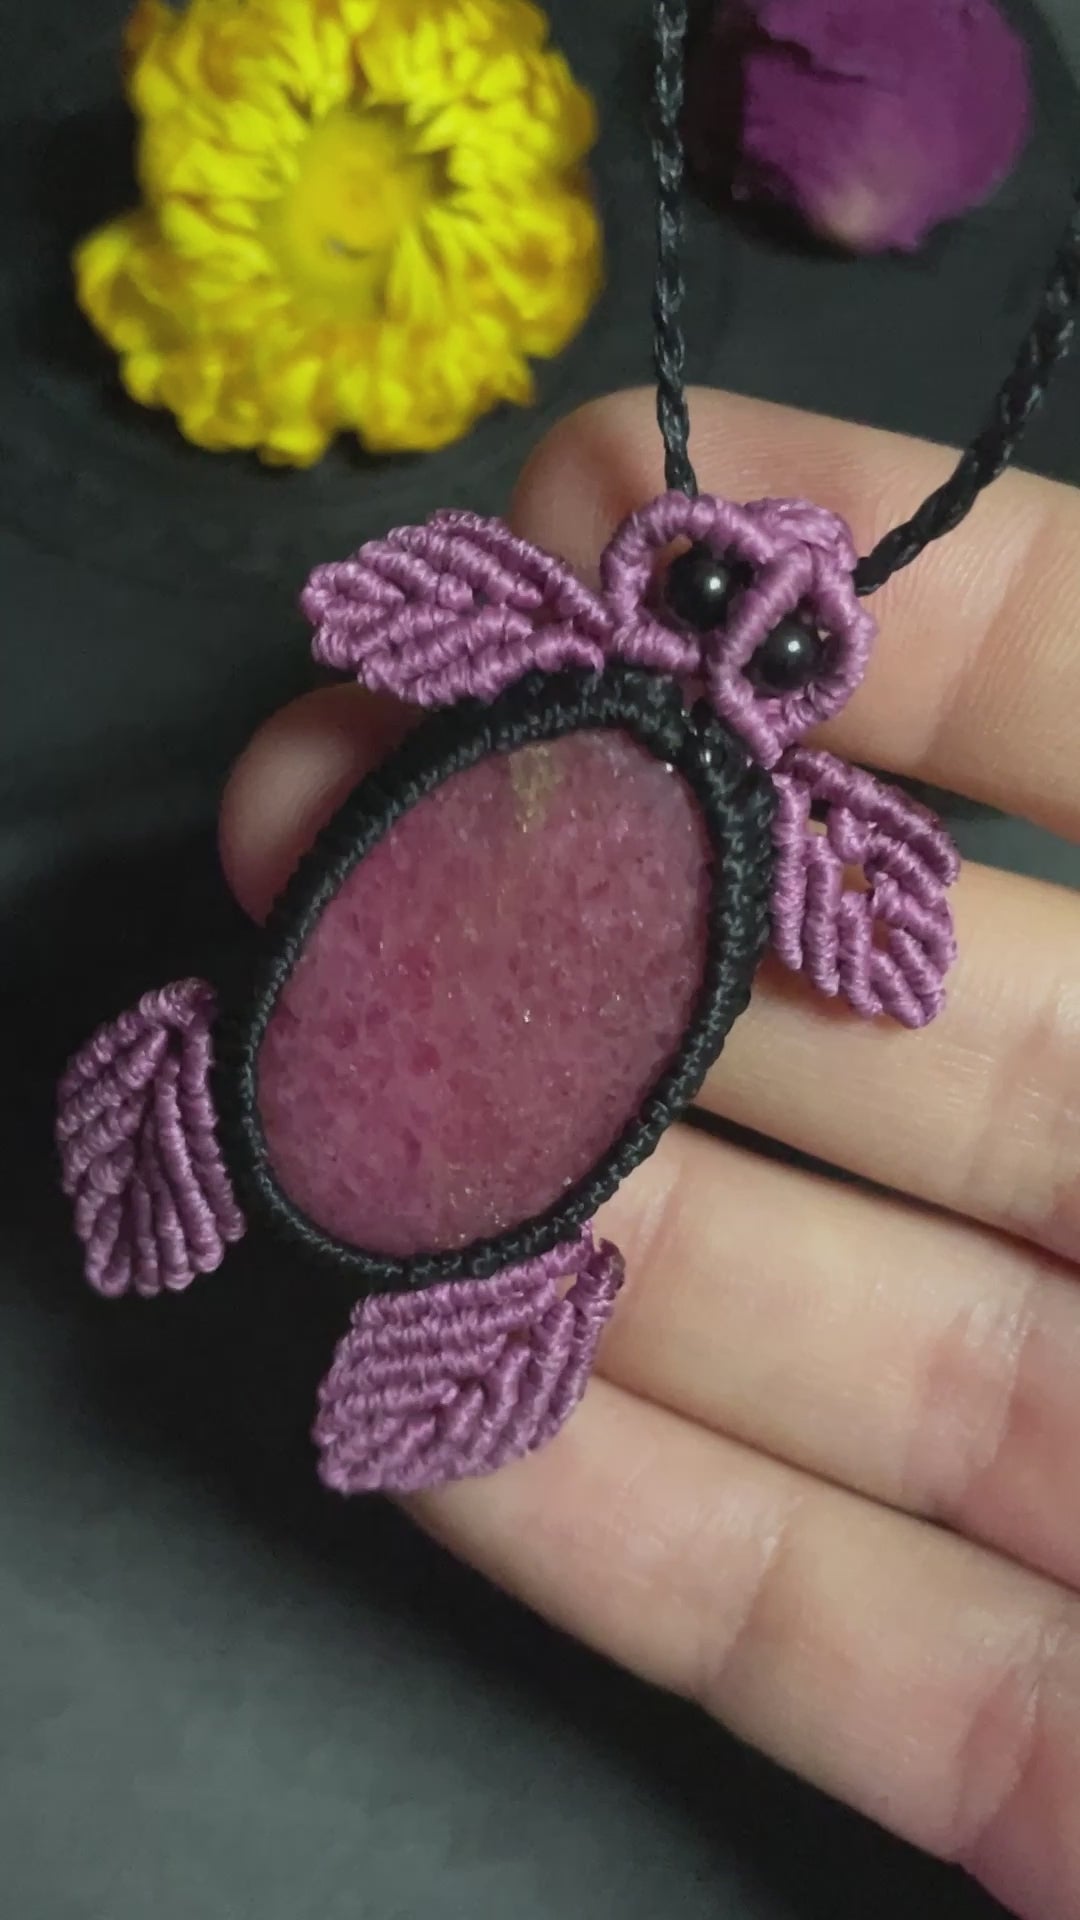 Pictured is a rhodonite cabochon wrapped in macrame thread. The rhodonite pendant is in the shape of a sea turtle. A gothic book and flowers are nearby.